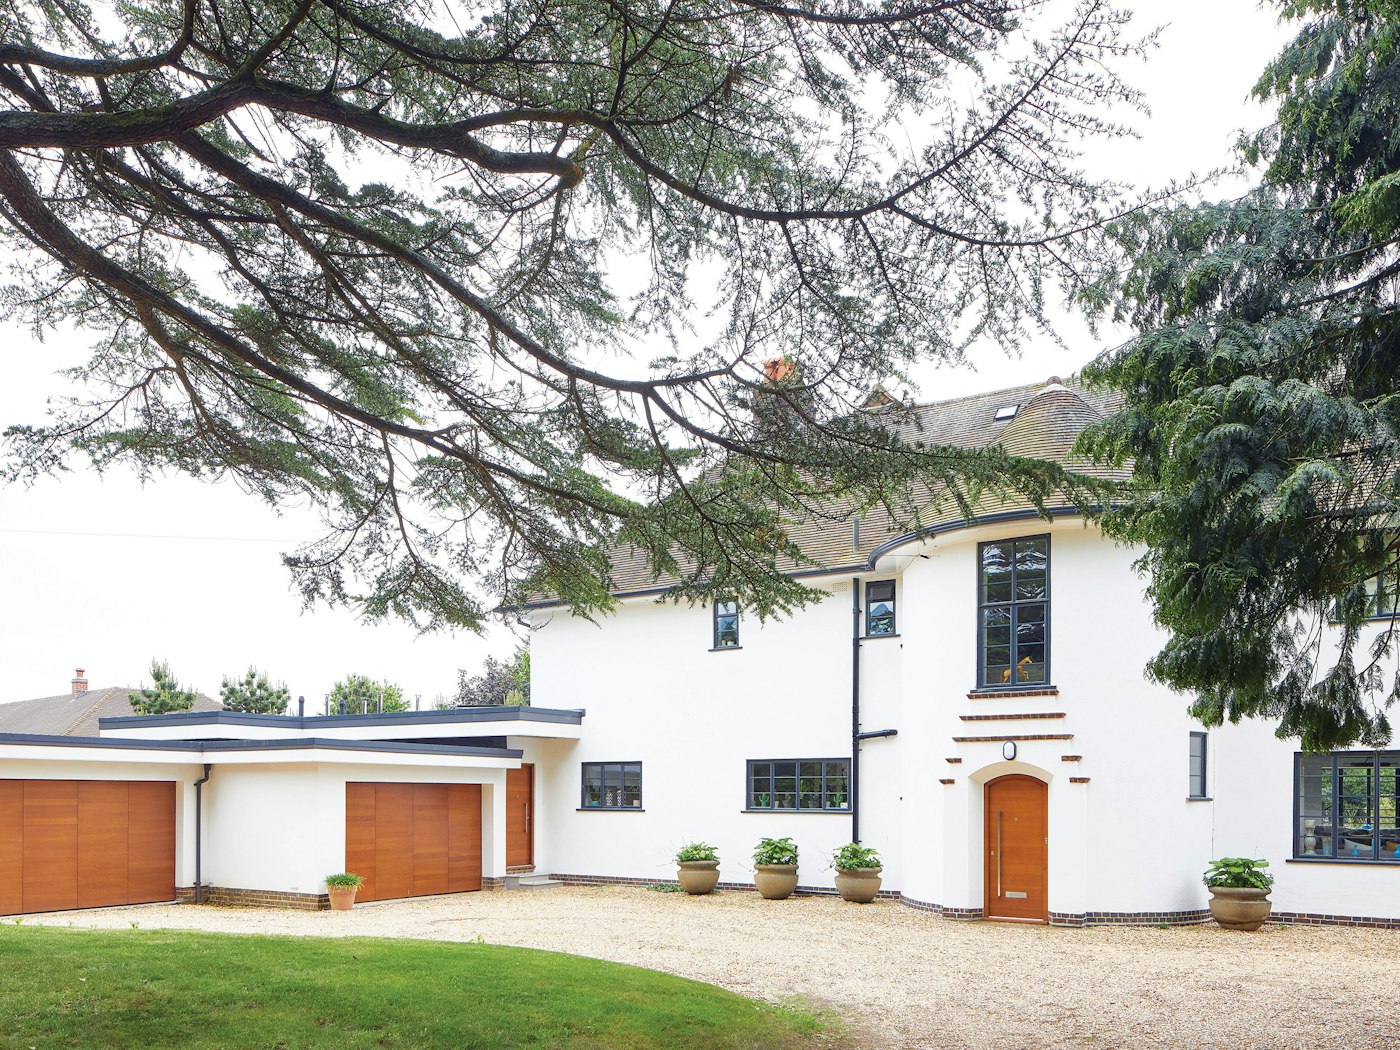 This house errs on the traditional side but is given a contemporary update with its white render and matching iroko front & garage doors in a simple design